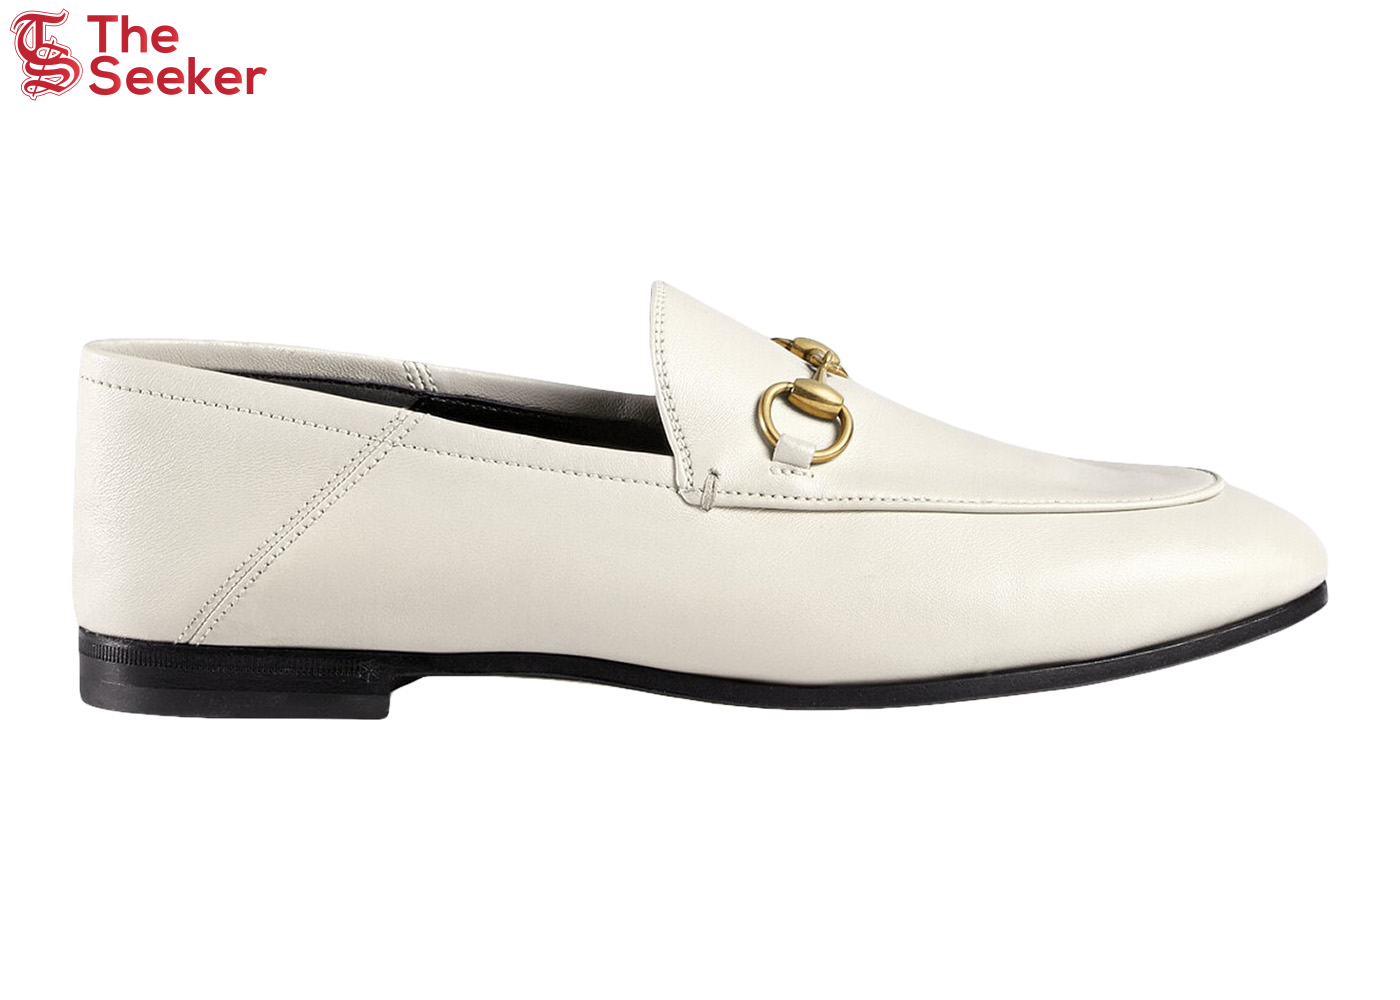 Gucci Horsebit Loafer Leather White (Women's)